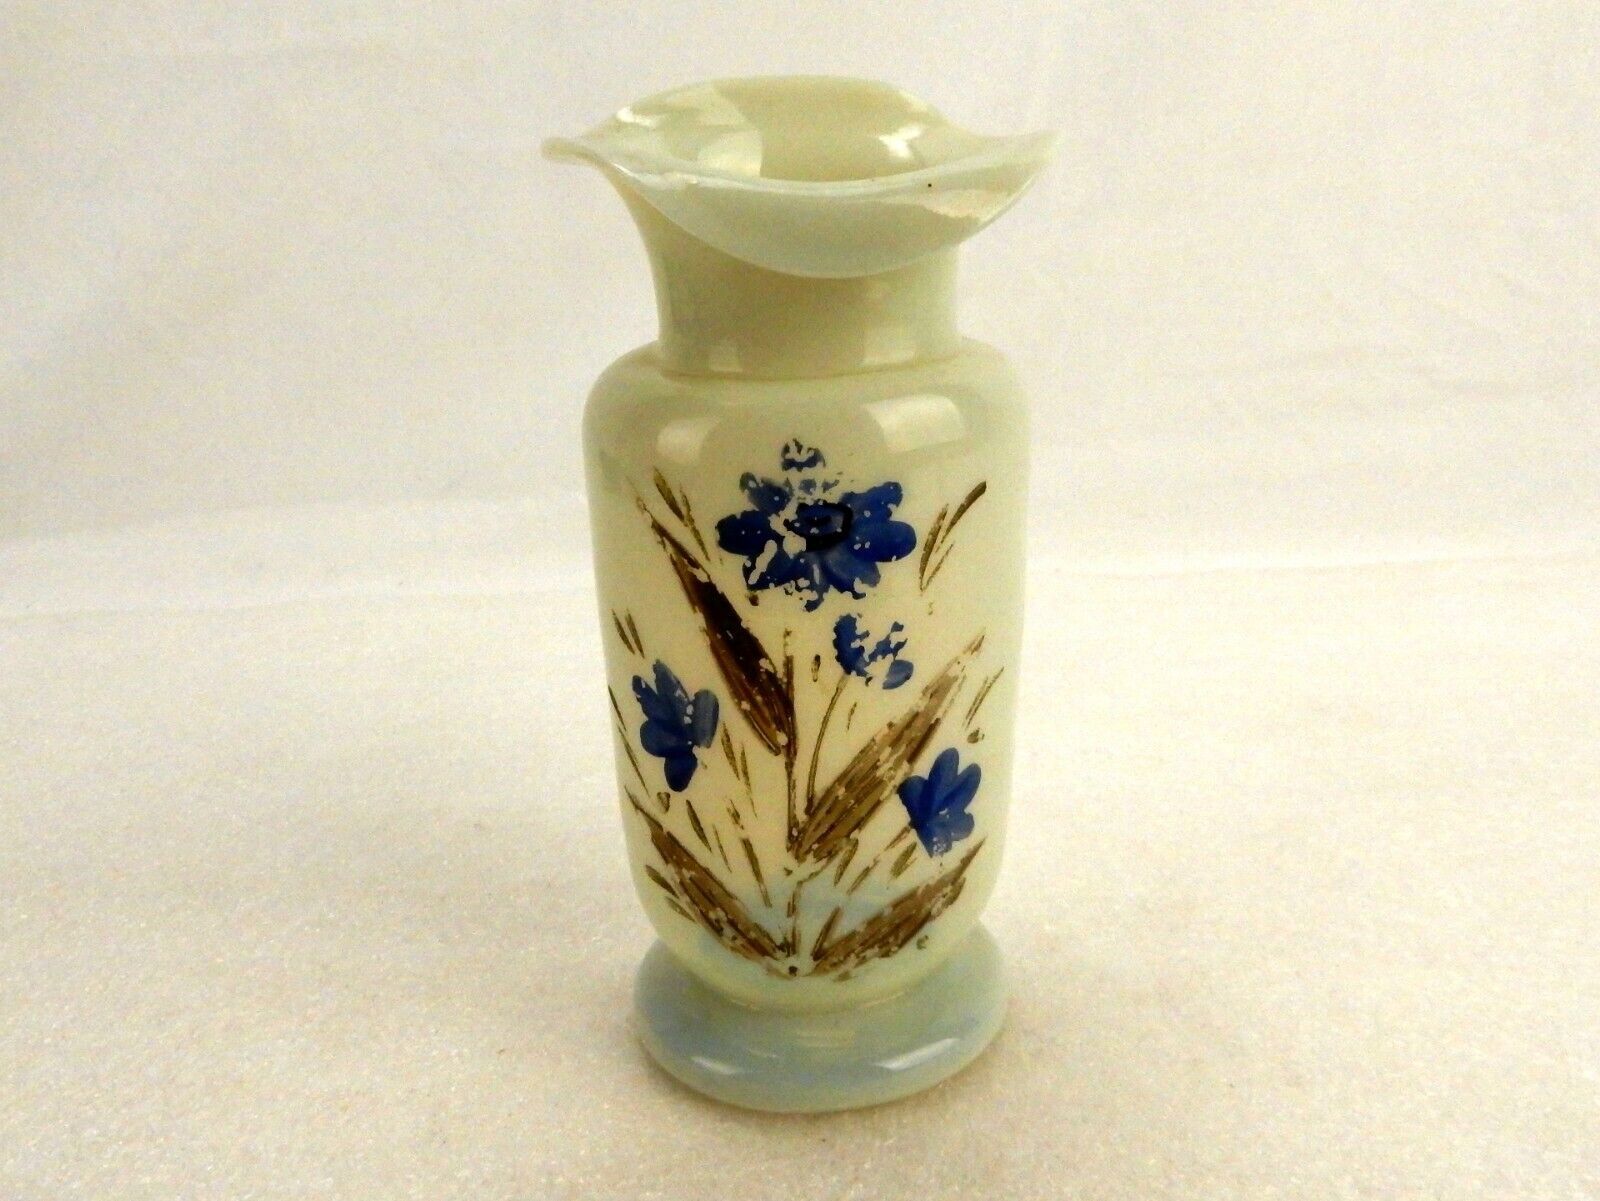 Primary image for Art Deco Glass Vase, Pale Chartreuse, Curled Wavy Lip, Hand Painted Violets